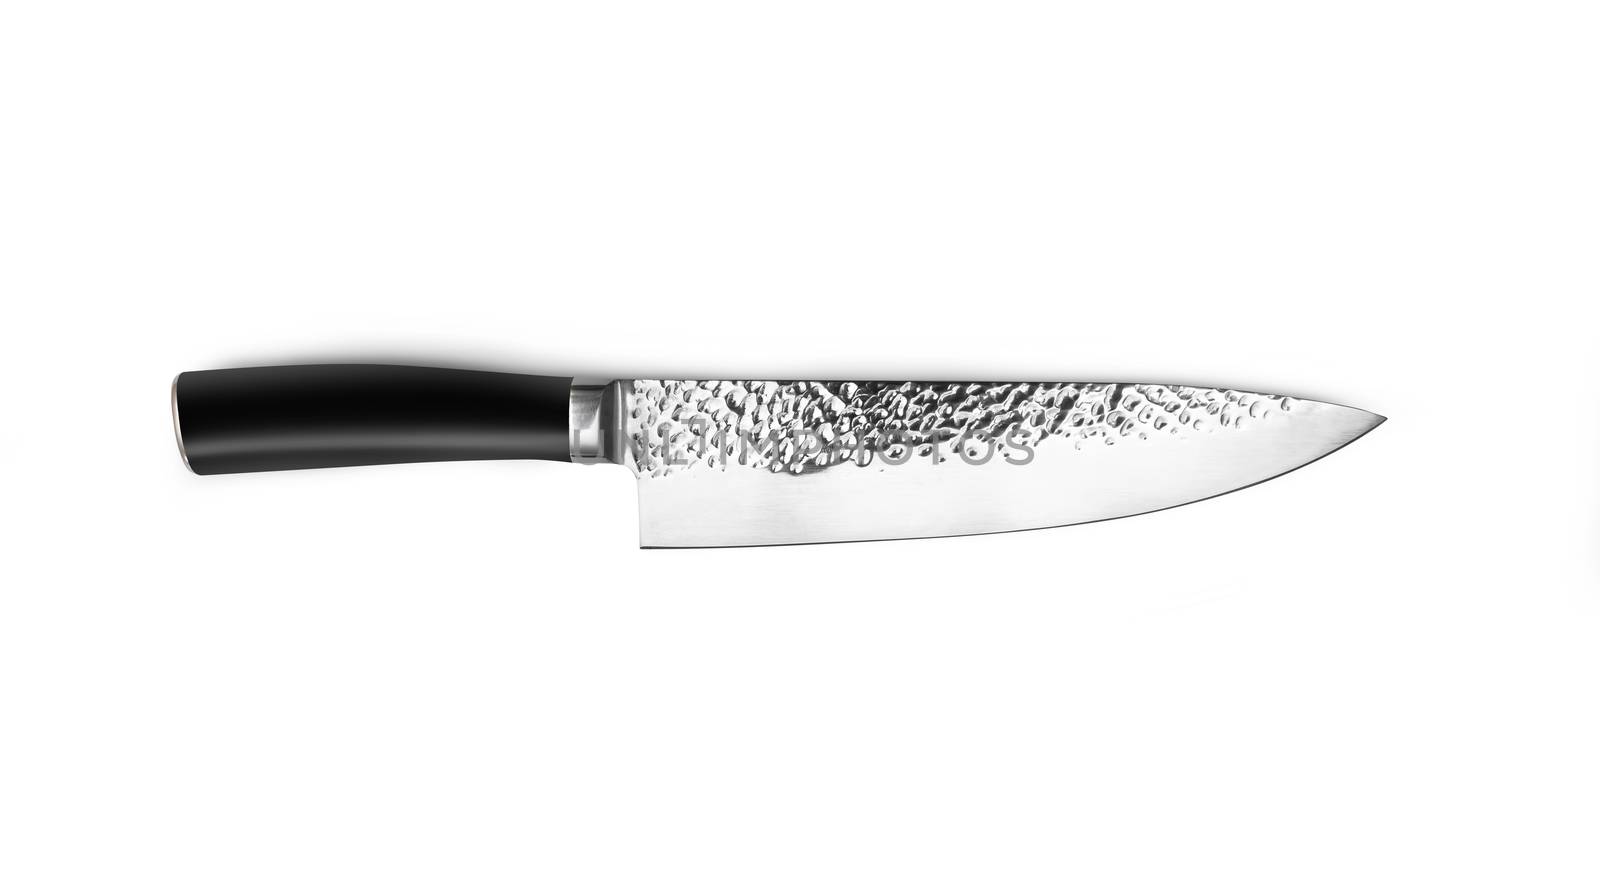 Chef's knife for your kitchen isolated on white by SlayCer